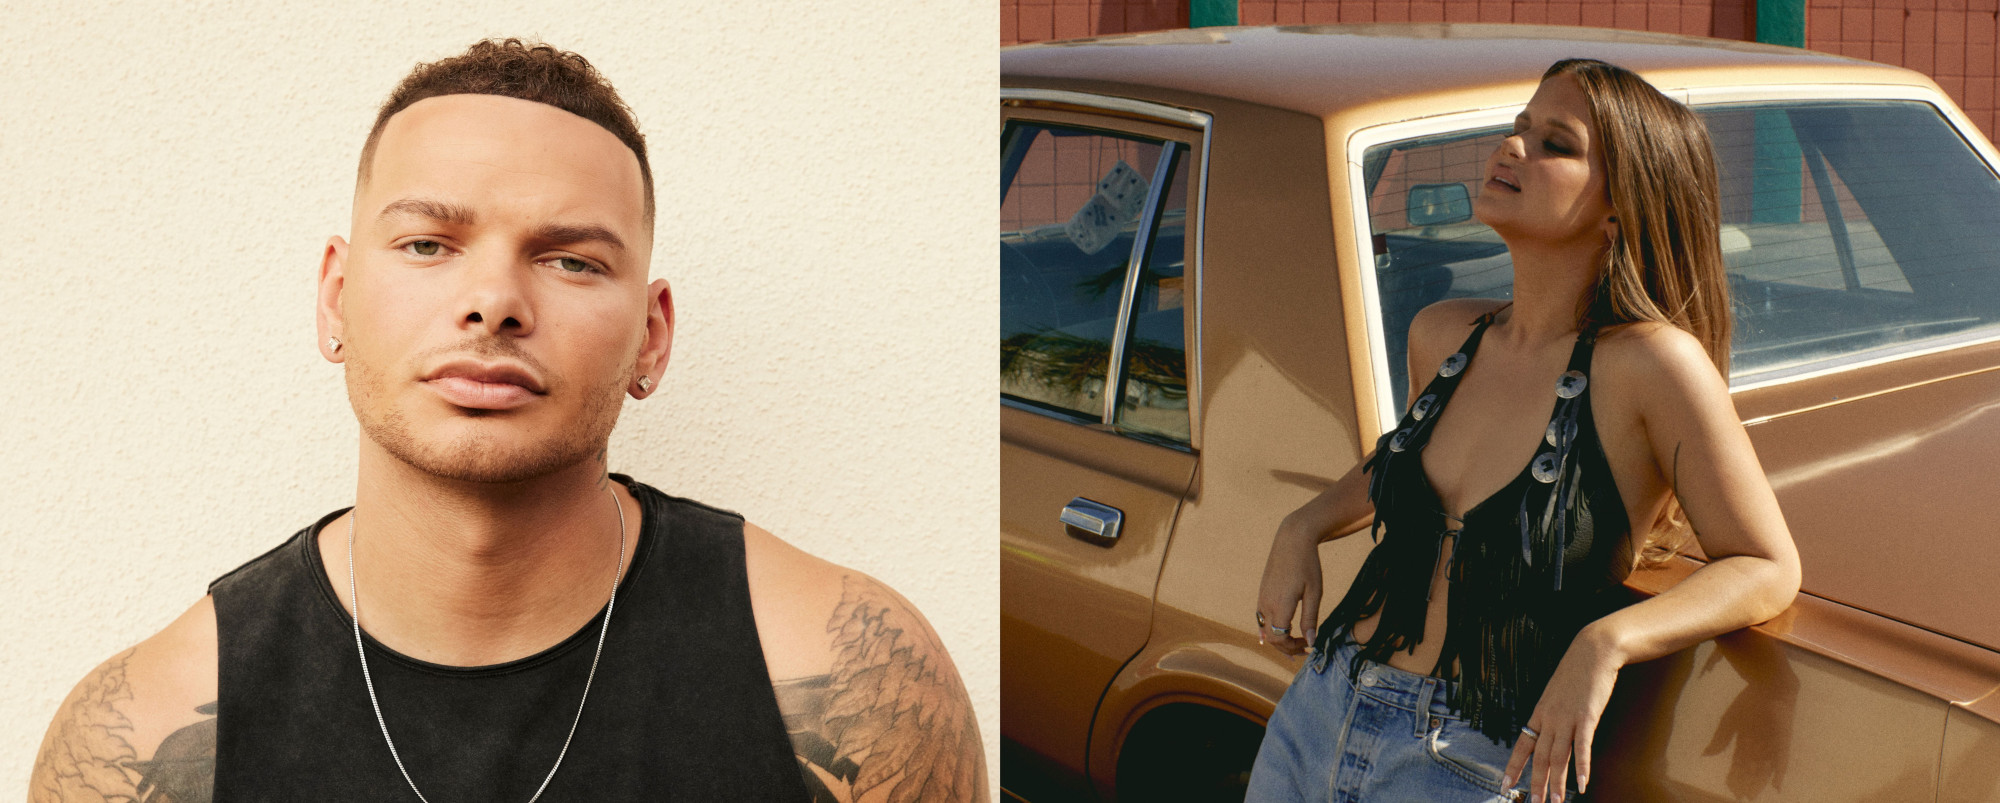 CMT Reveals Stacked Performance Lineup for 2022 Awards: Kane Brown, Maren Morris, & More